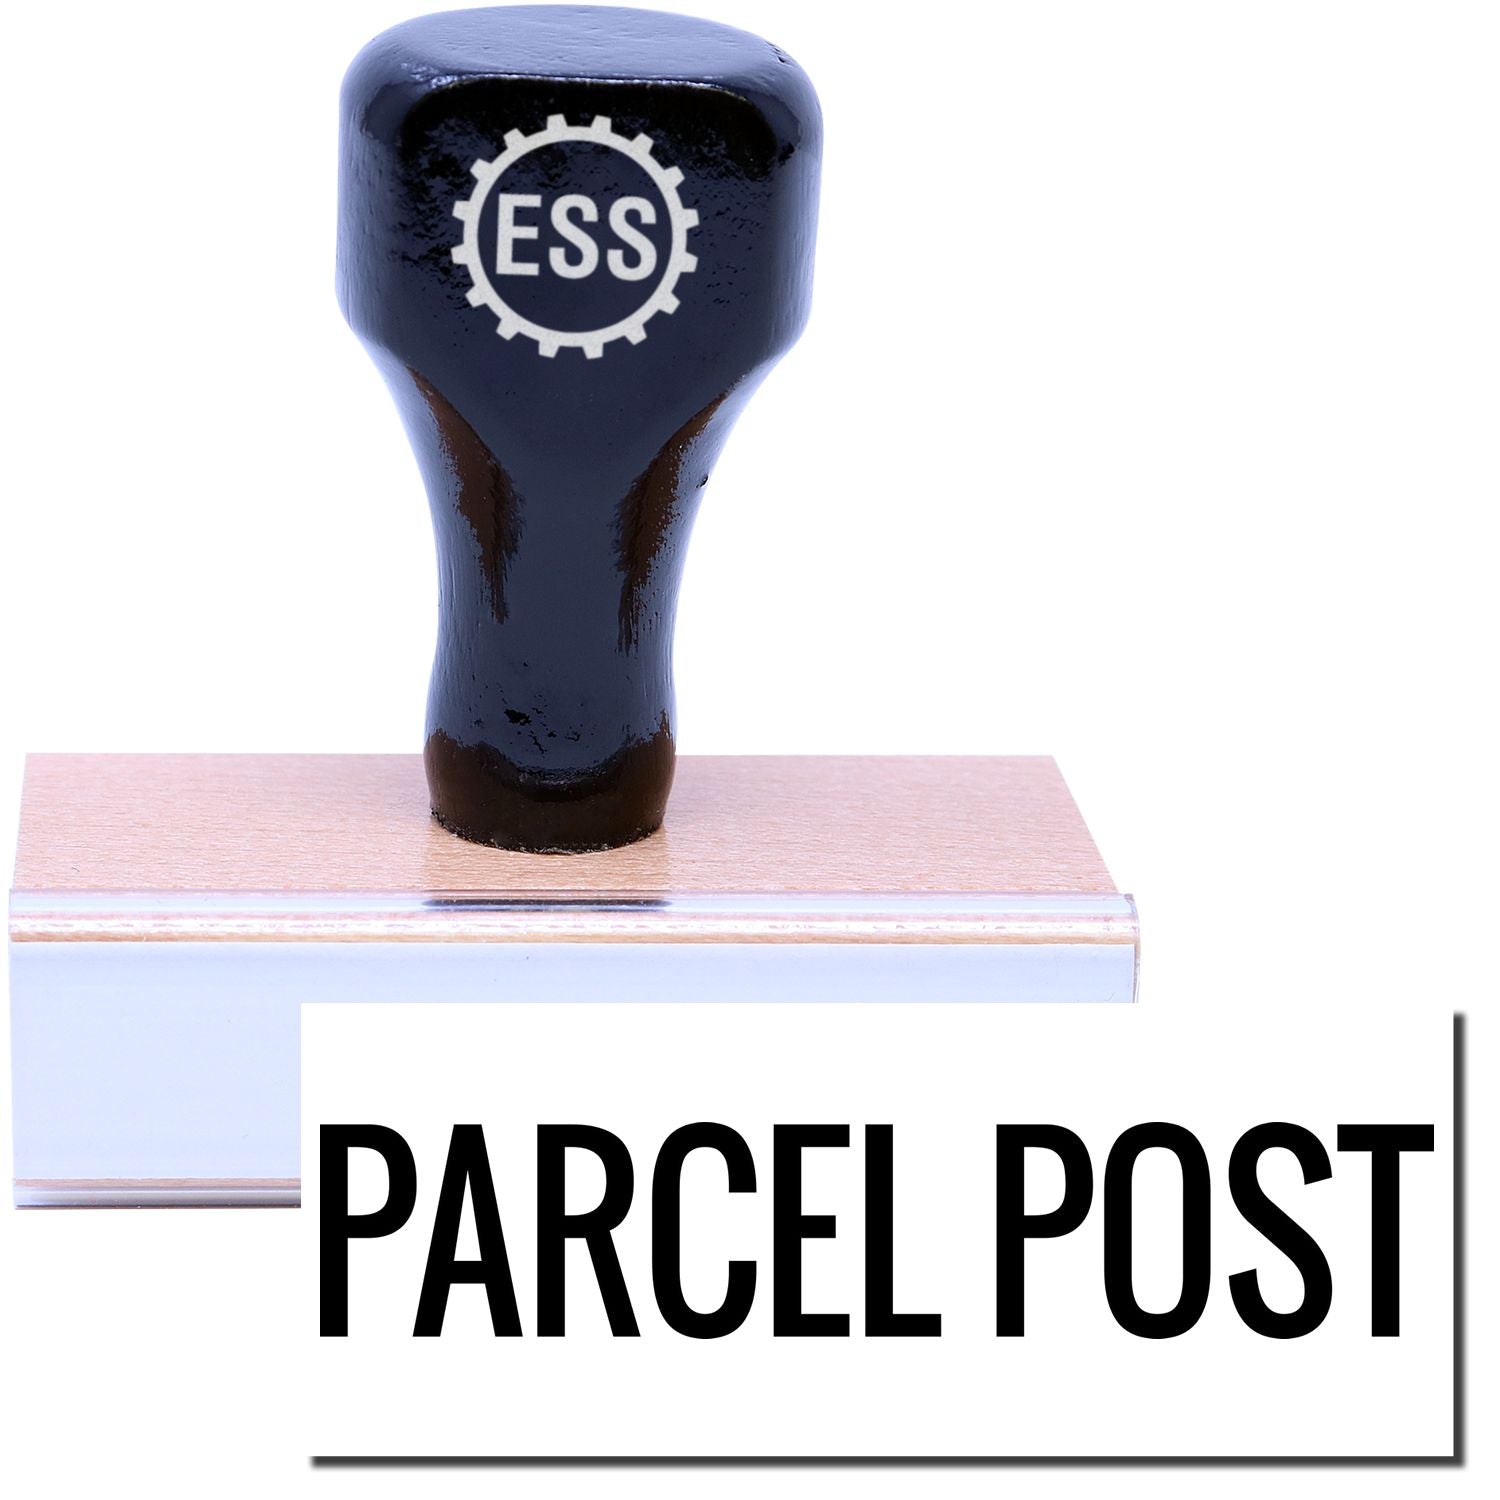 A stock office rubber stamp with a stamped image showing how the text "PARCEL POST" is displayed after stamping.